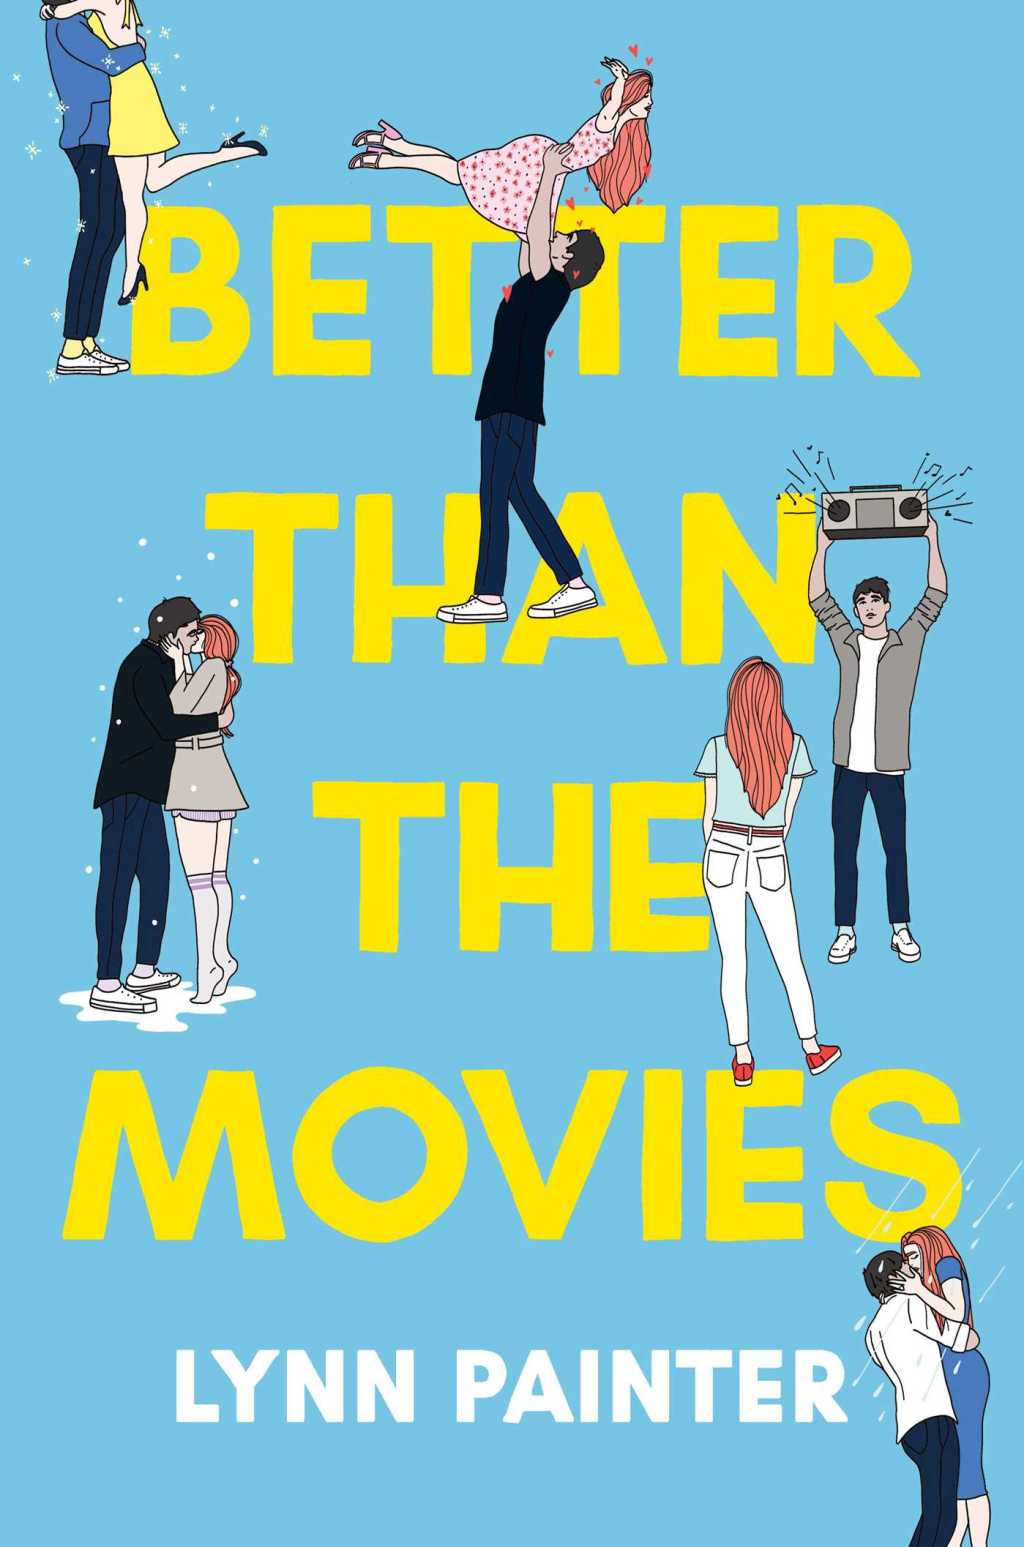 BETTER THAN THE MOVIES #1 BY LYNN PAINTER REVIEW